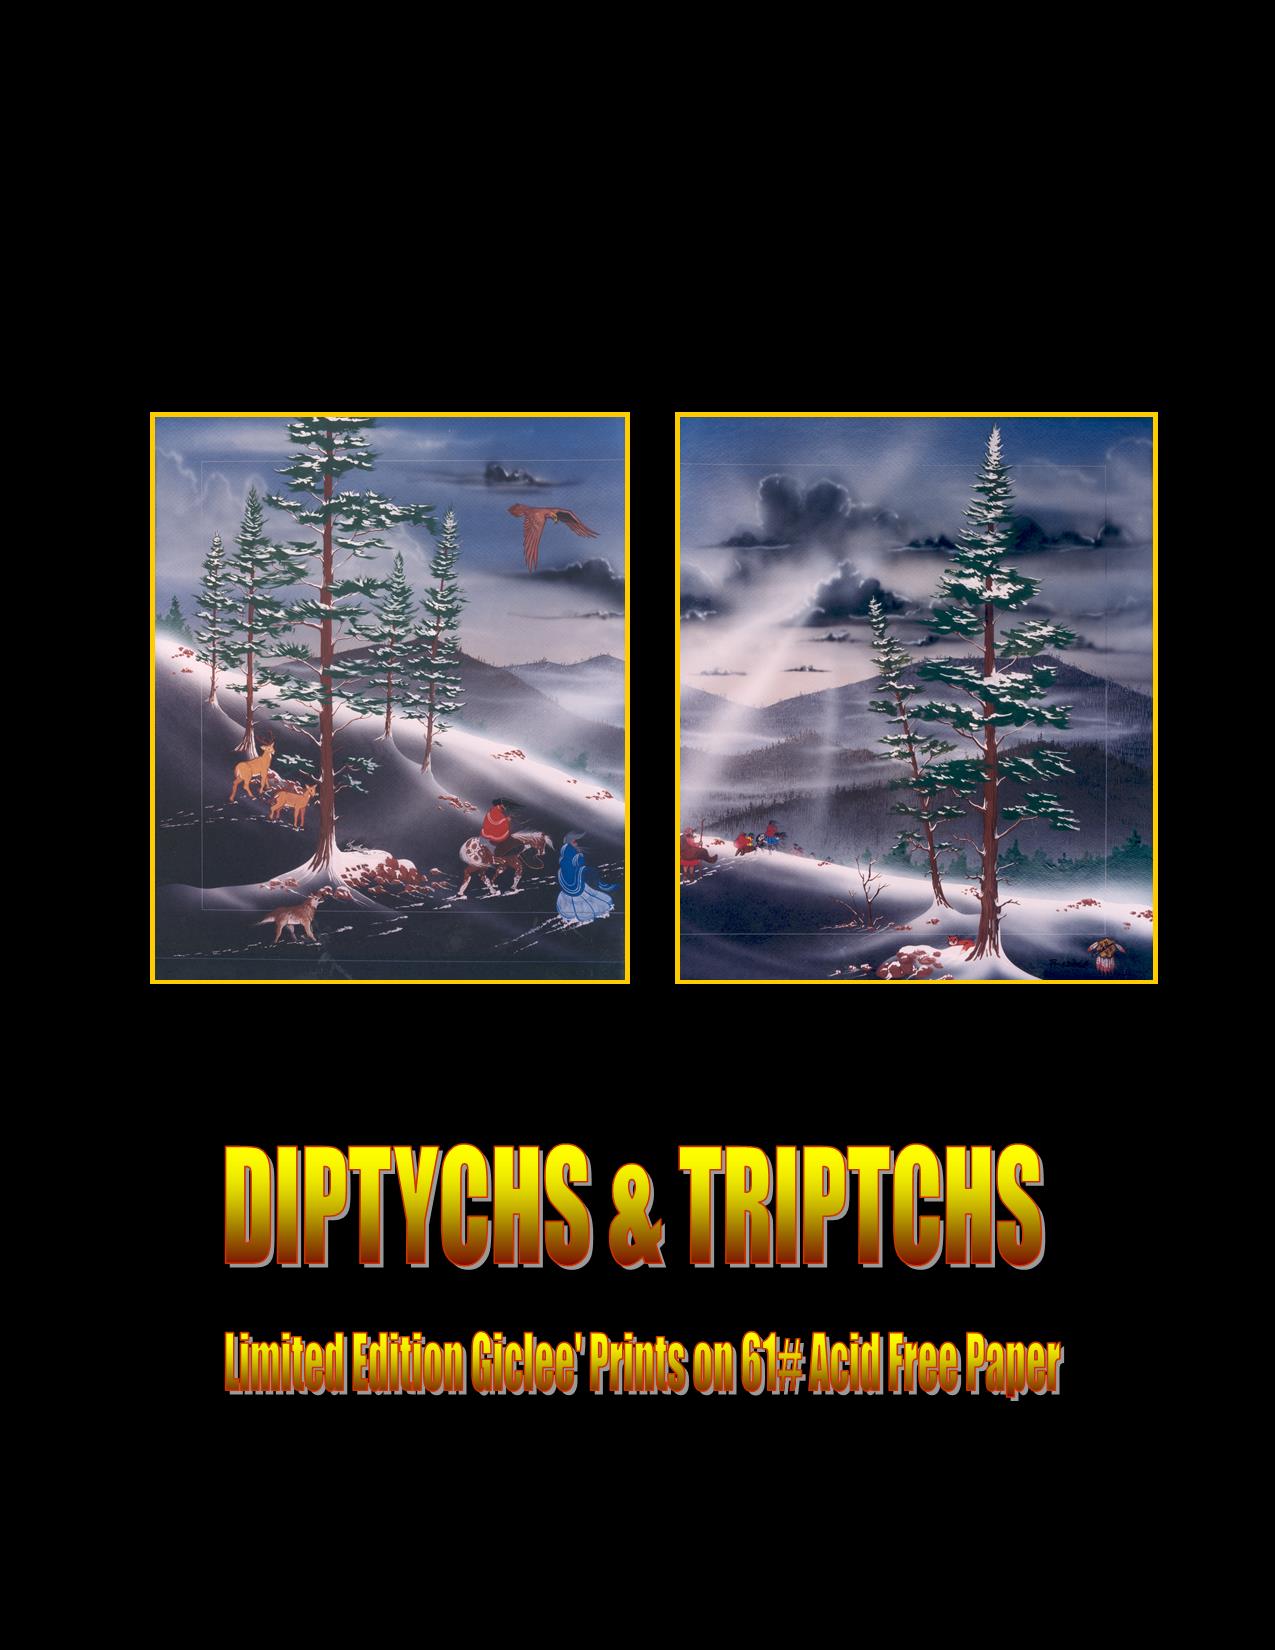 Diptychs and Tripychs - Click on this image to enter gallery.